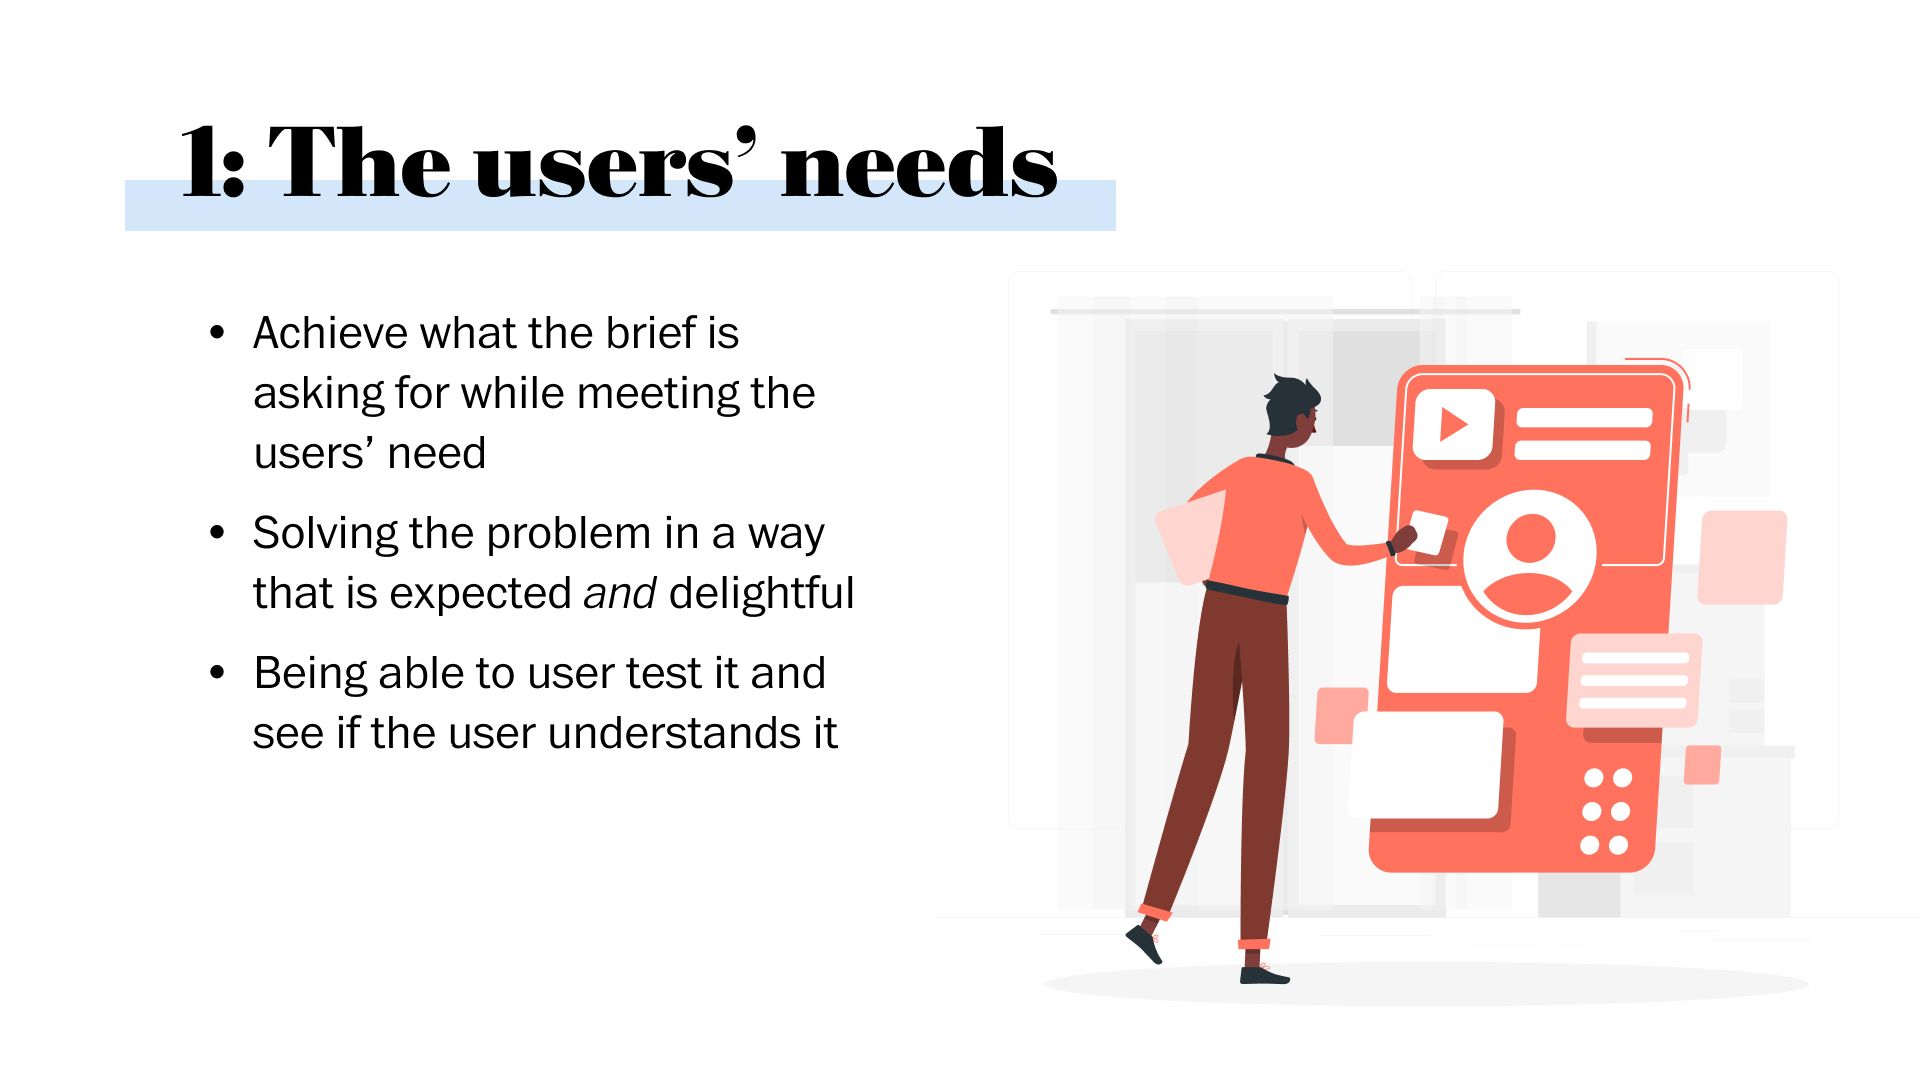 The essence of any successful design lies in meeting the needs of its users.